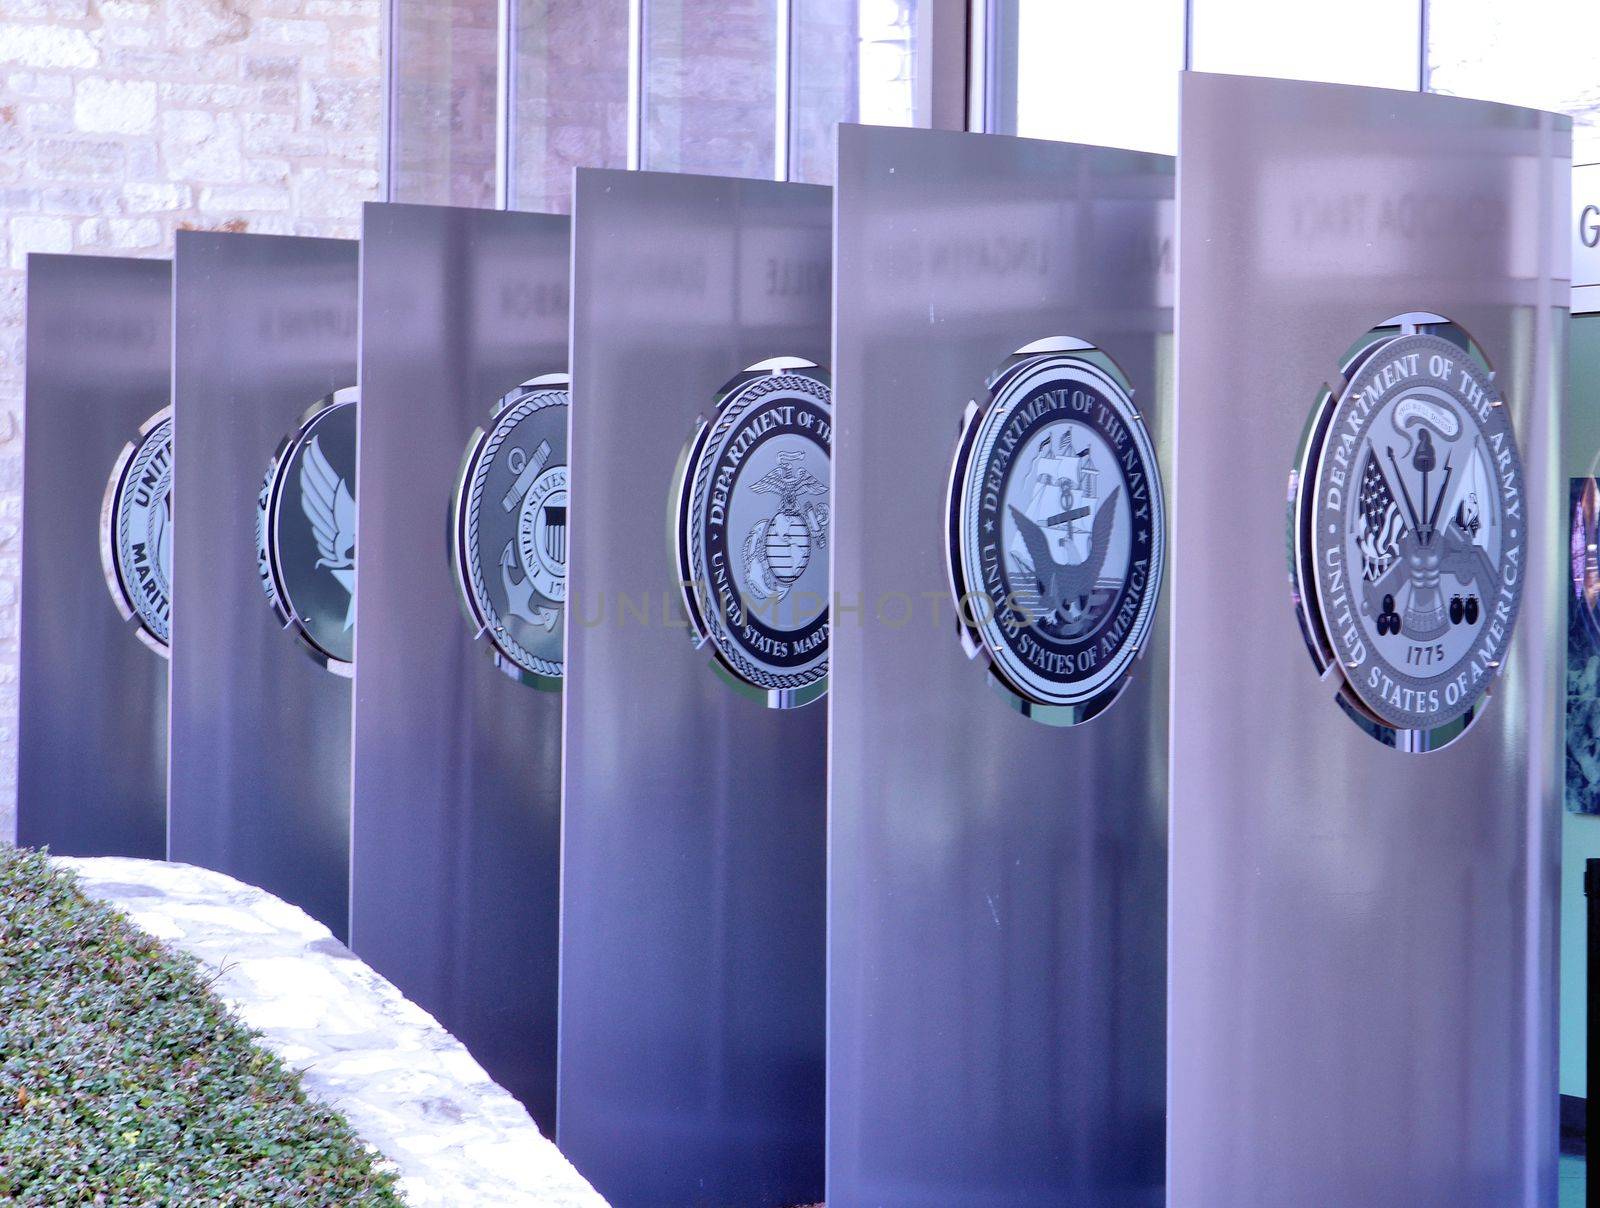 FREDERICKSBURG, TEXAS/UNITED STATES - FEBRUARY 21: Seals of the U.S. armed forces are displayed in front of the National Museum of the Pacific War in  Fredericksburg, Texas on February 21, 2015.